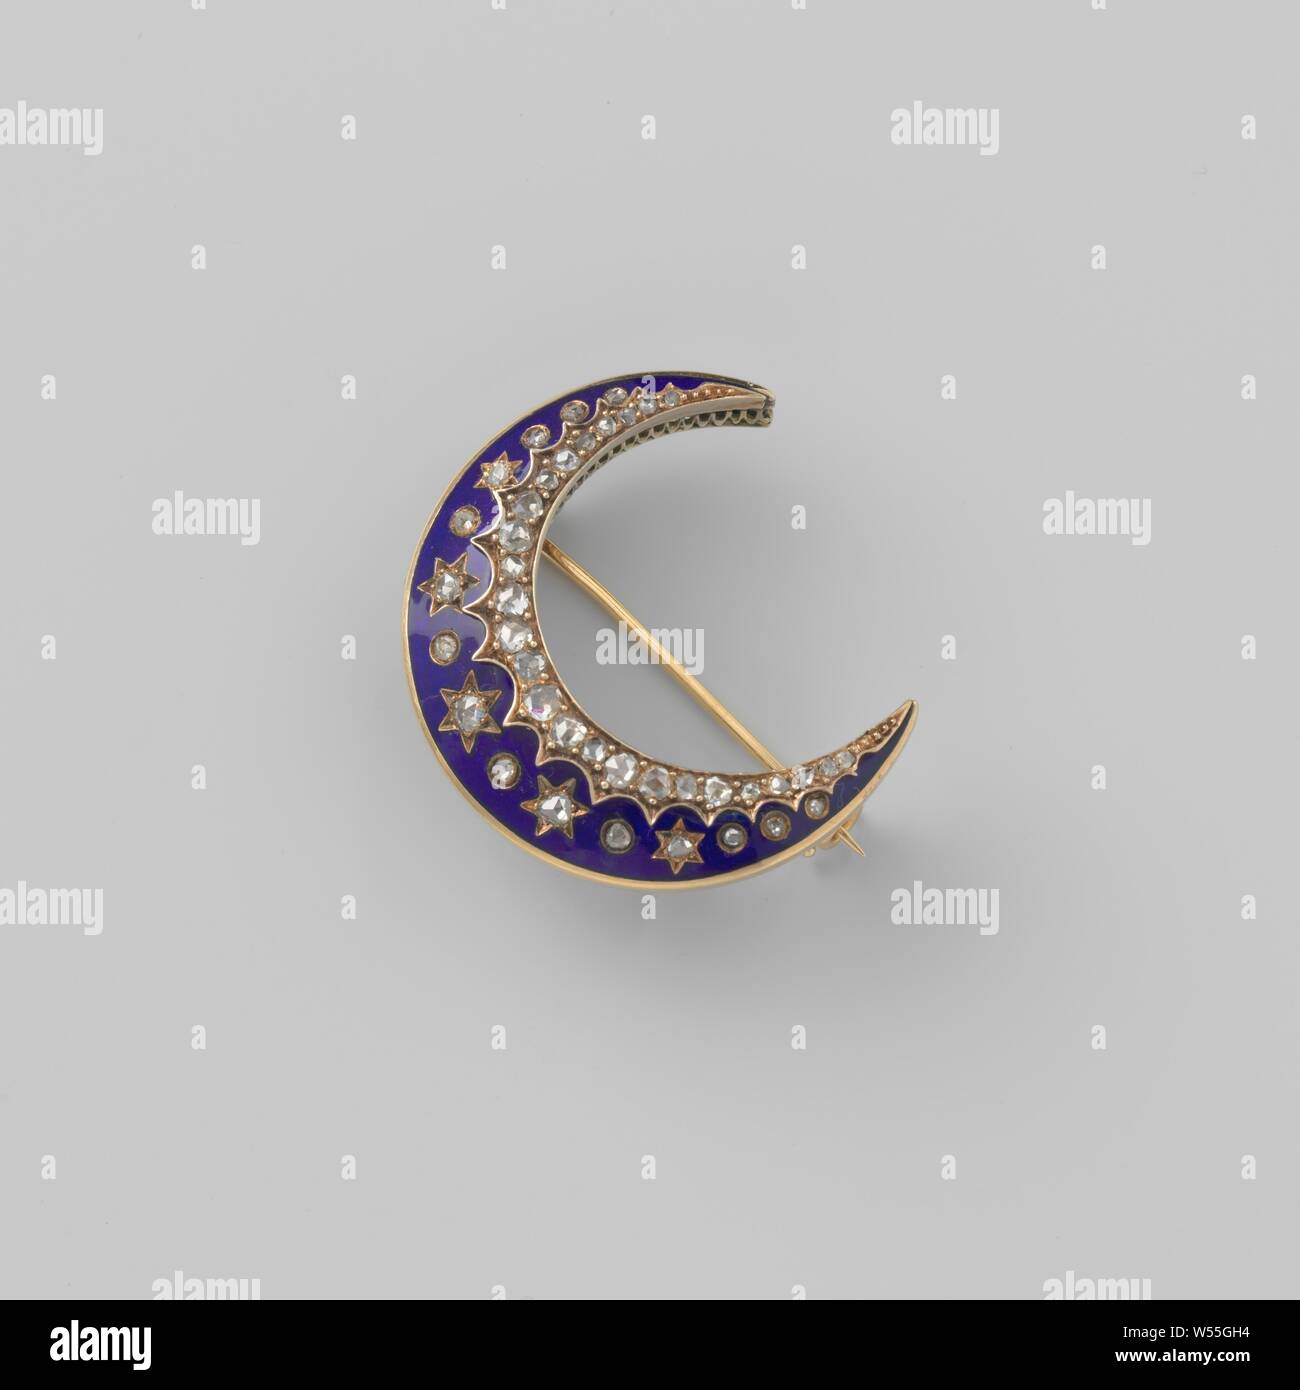 Brooch in the shape of a crescent moon, Golden brooch in the shape of a crescent moon, set with rose-cut diamonds in an incrustation setting and decorated with dark blue enamel., anonymous, Netherlands, c. 1870 - c. 1890, gold (metal), diamond (mineral), grinding, d 3.2 cm Stock Photo